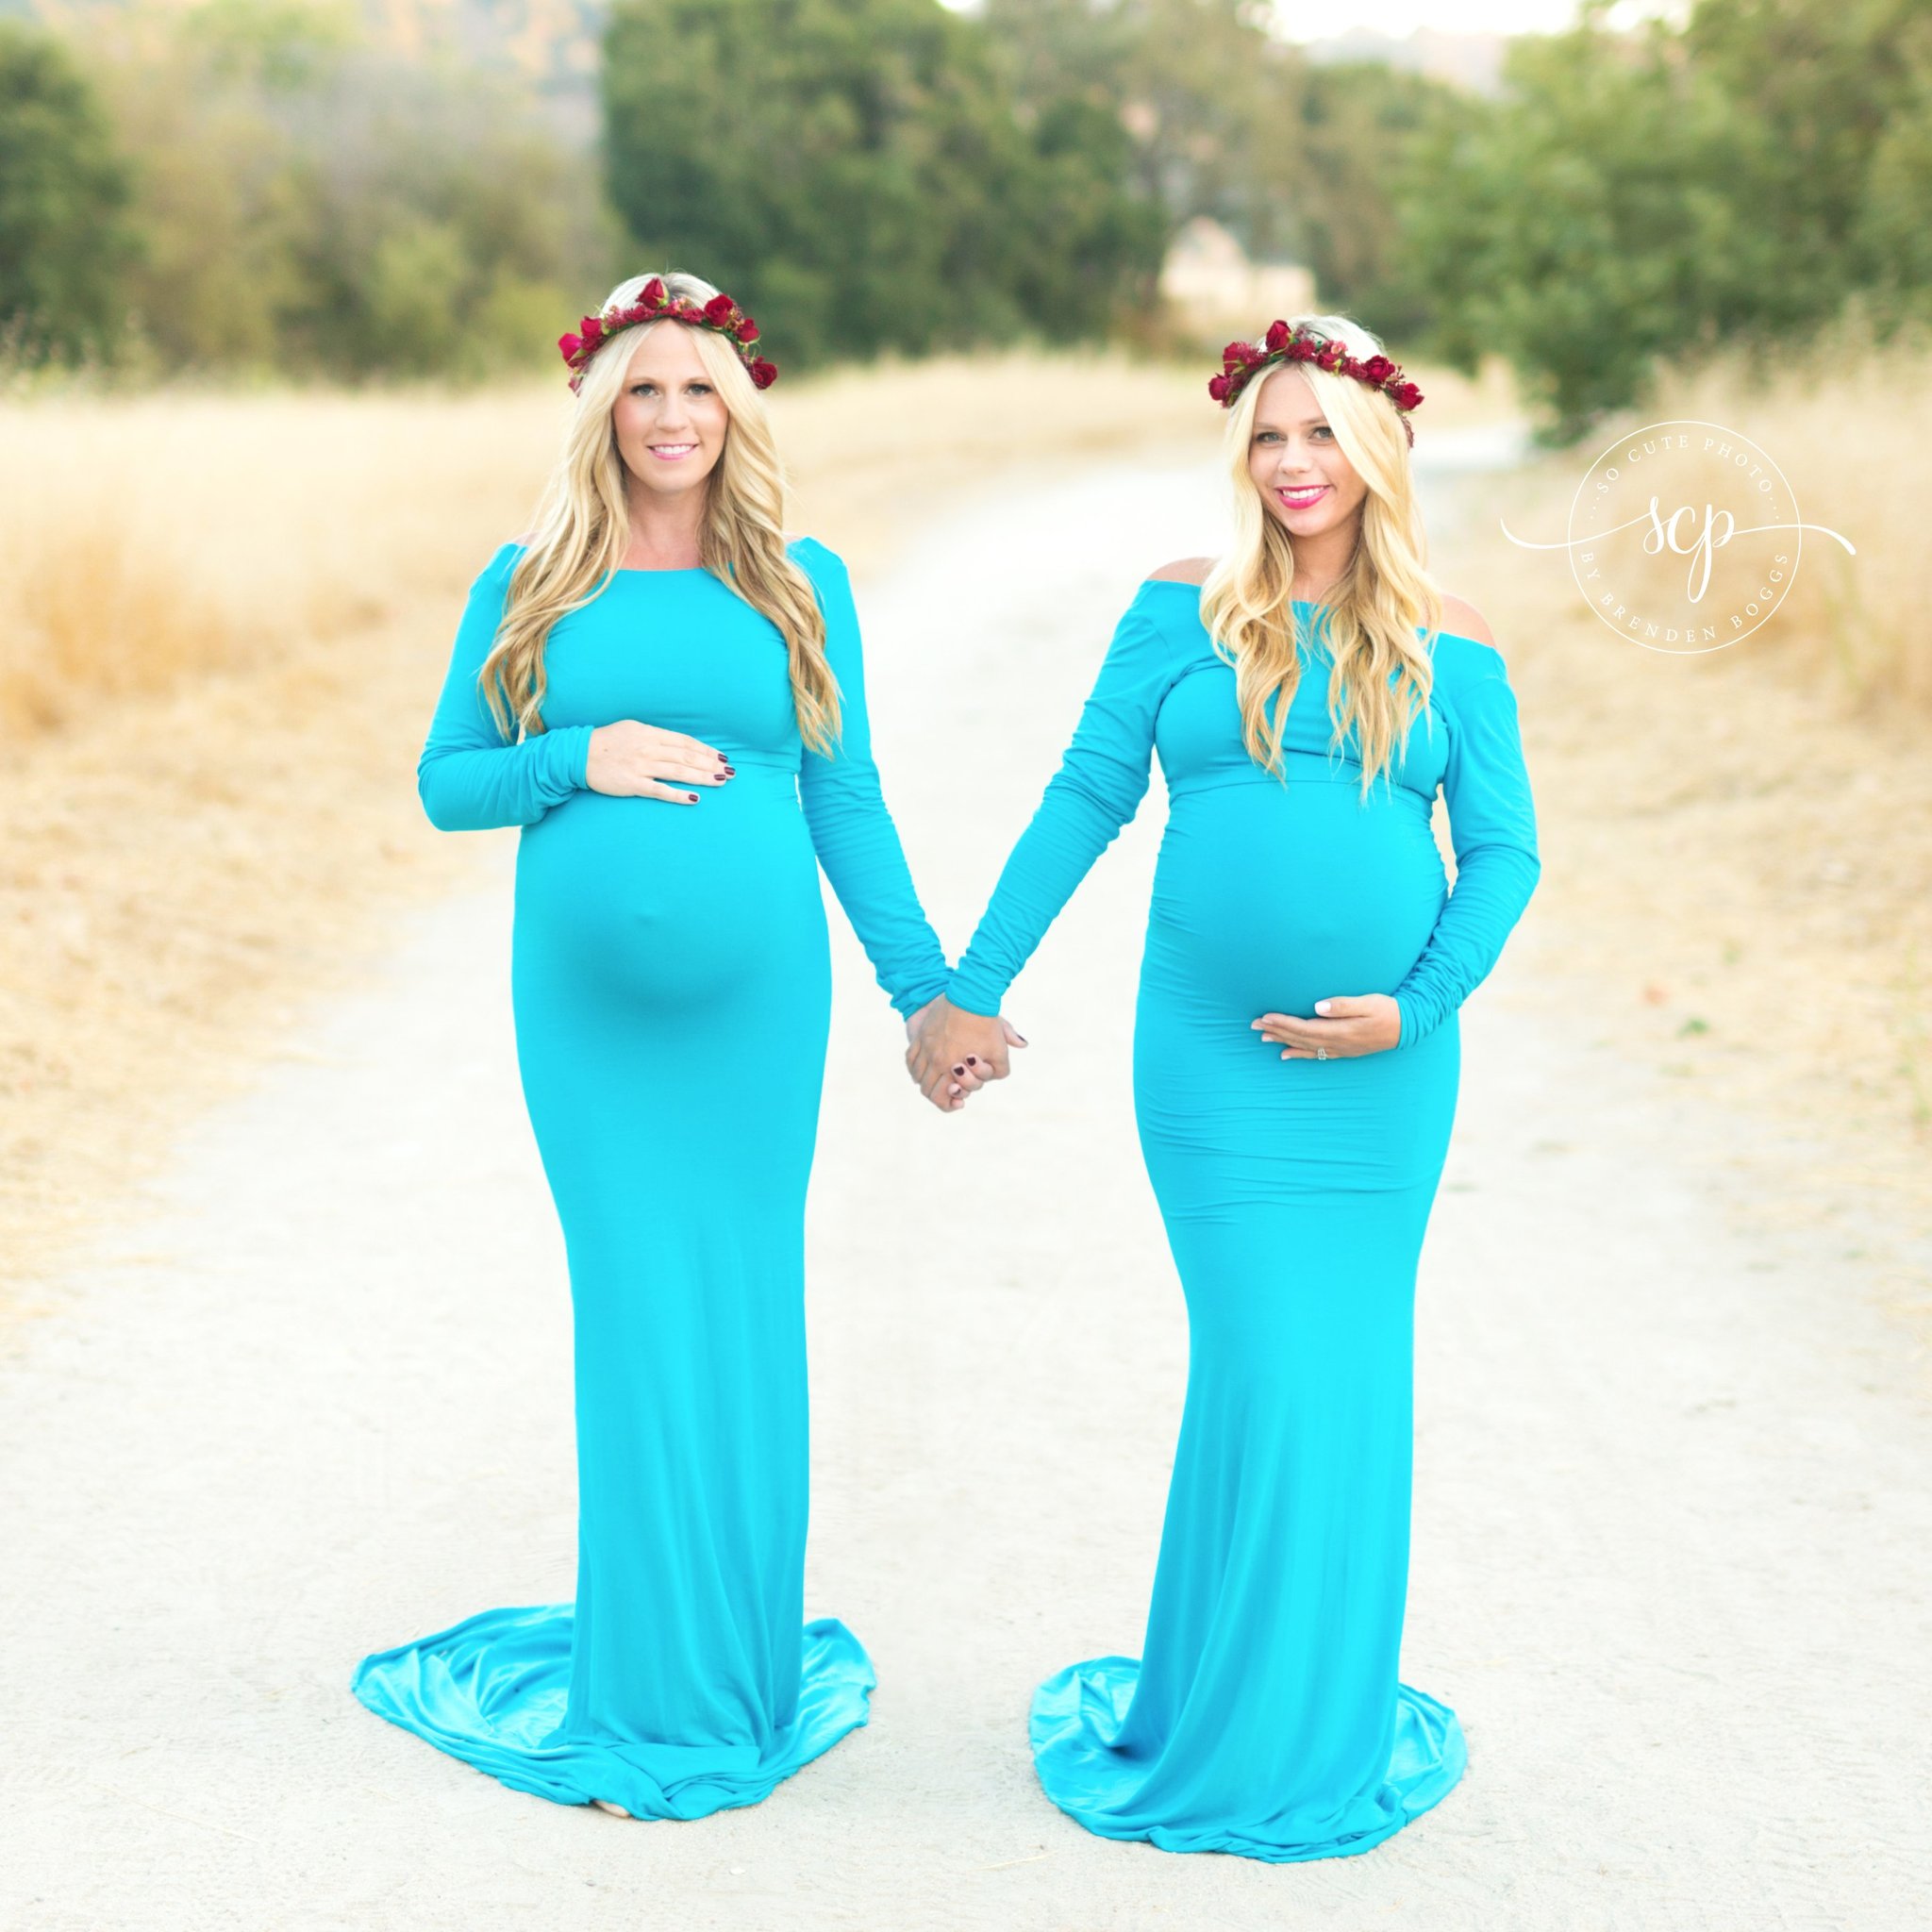 Twins Who Gave Birth on Same Day Re-Create Maternity Photo ...